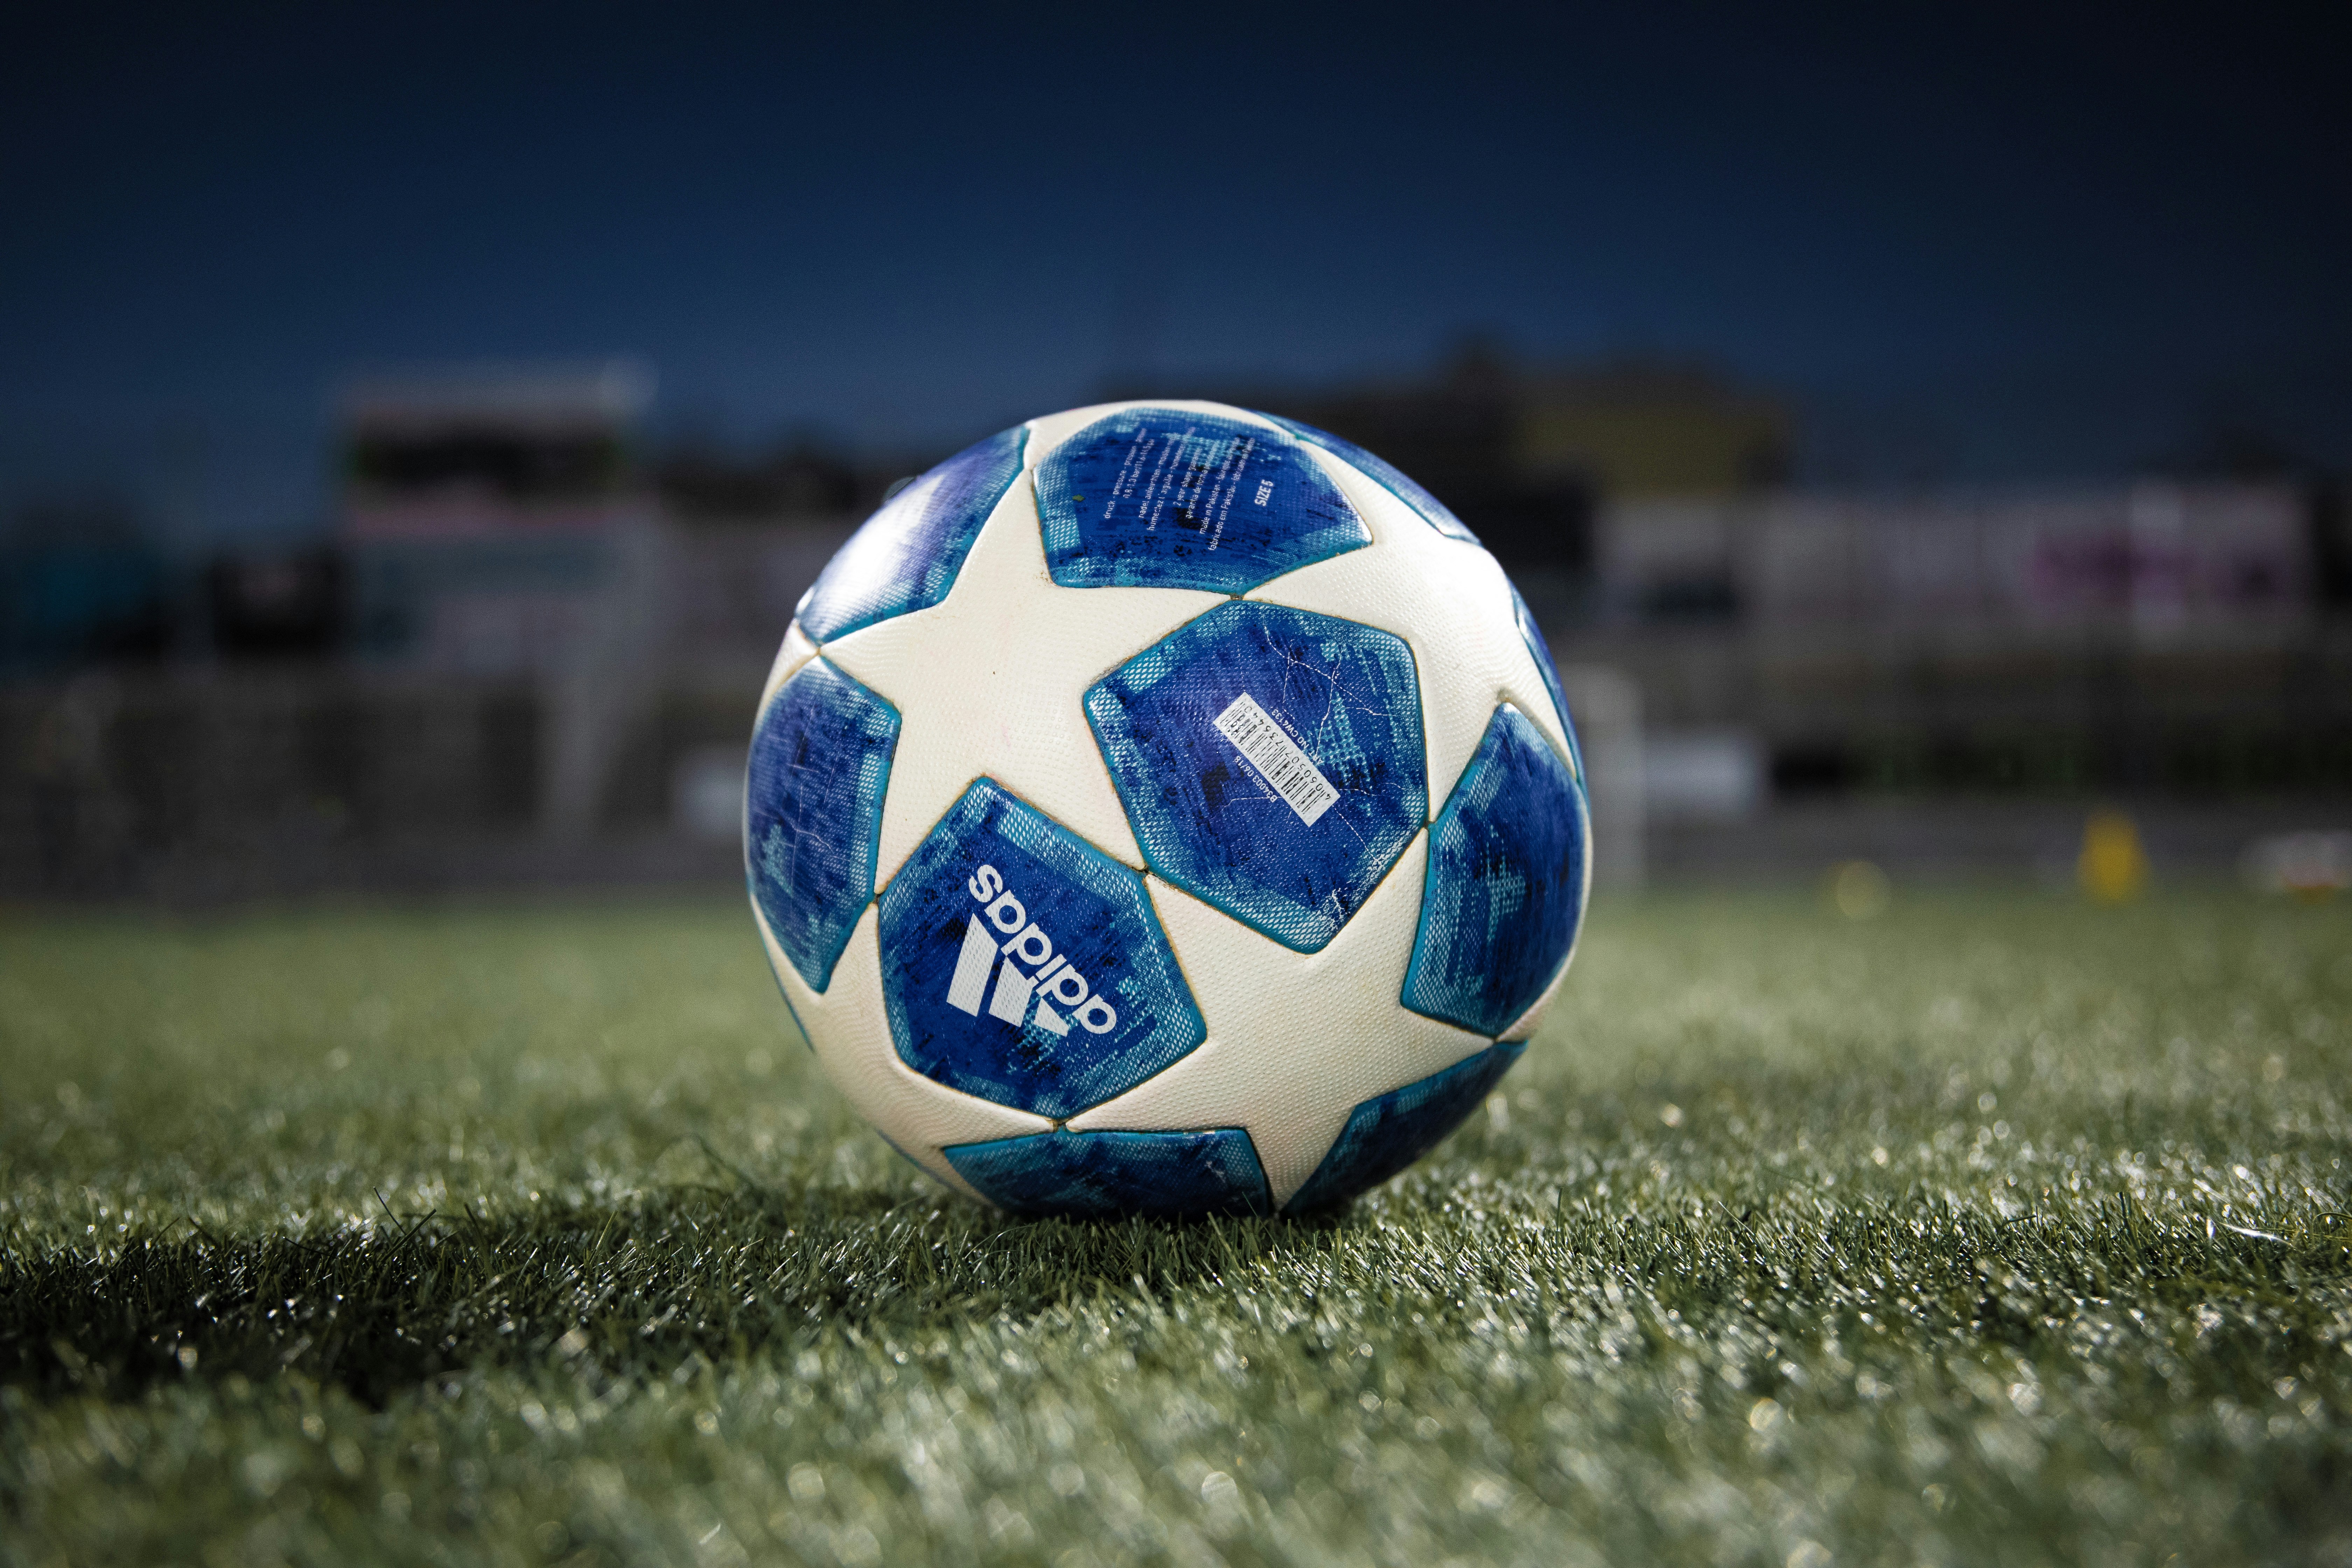 Soccer Ball Pictures - Download Free Images on Unsplash